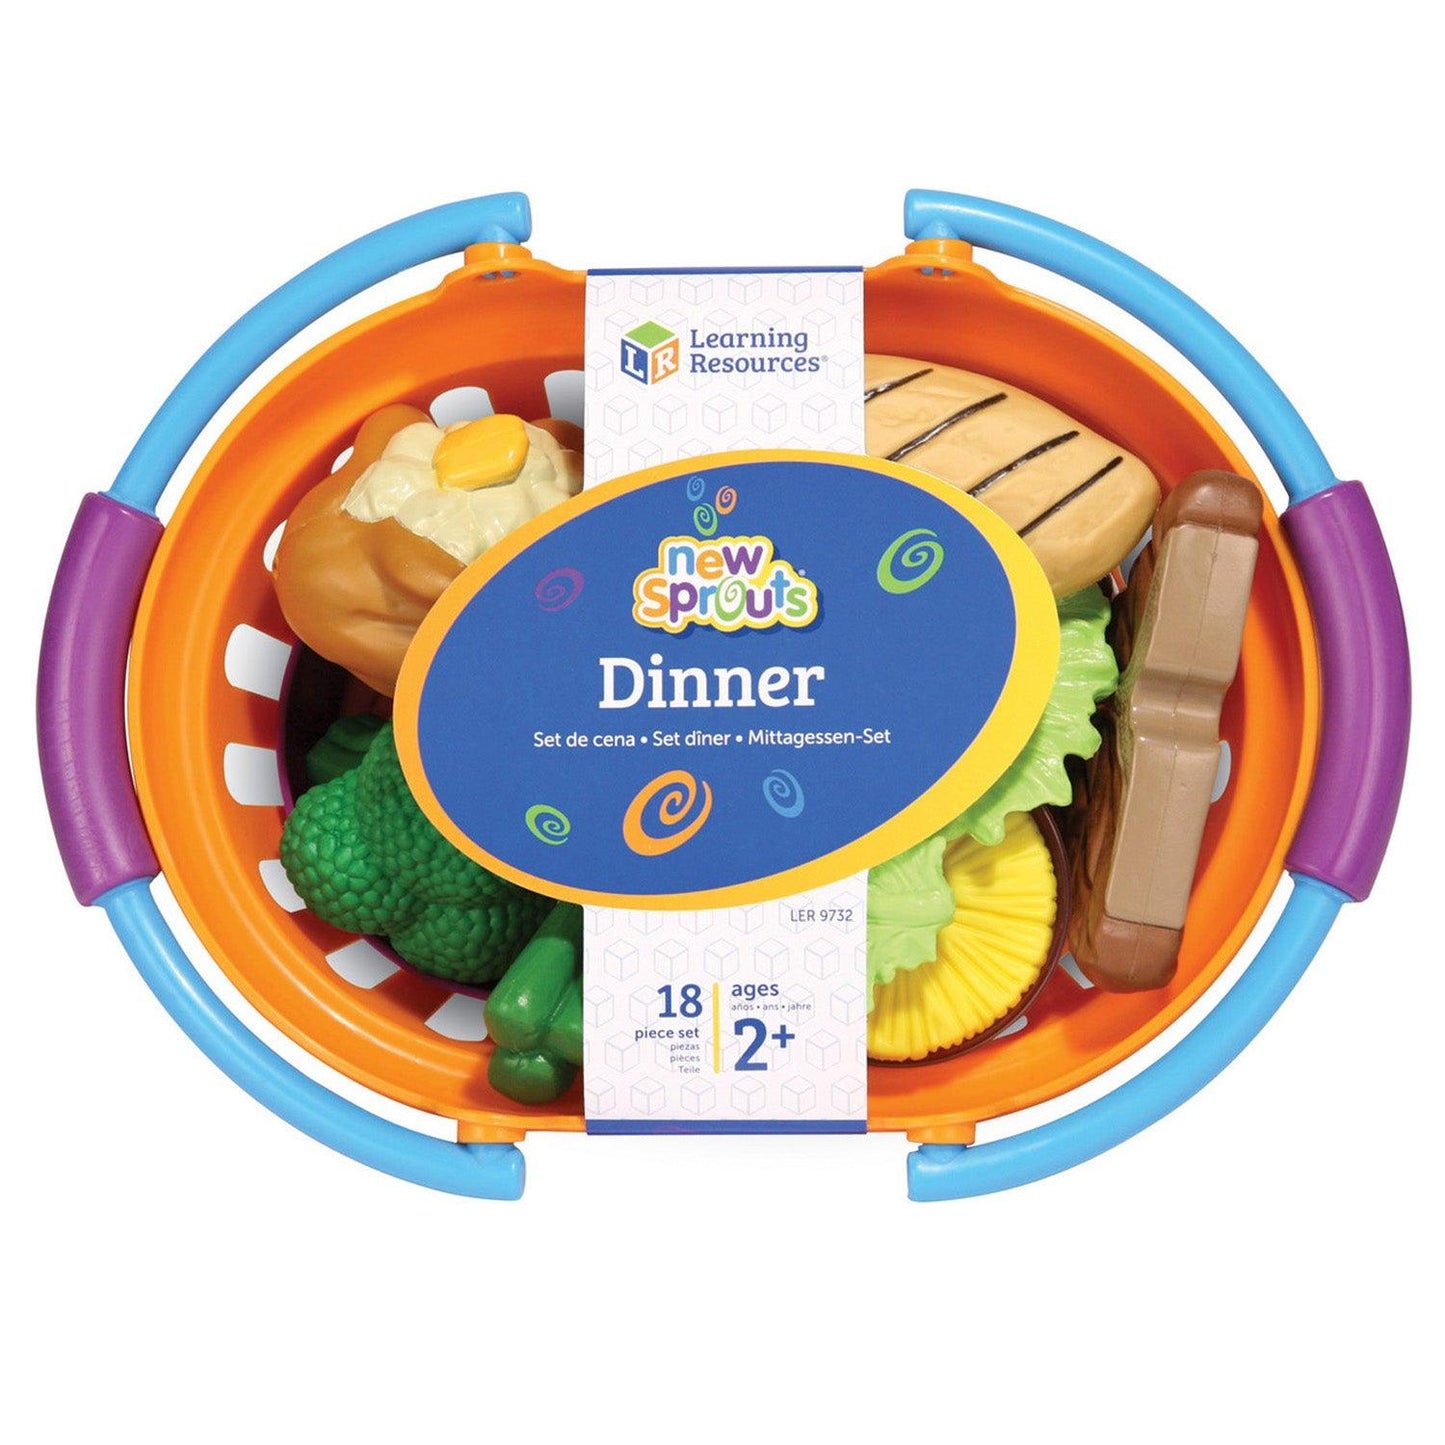 New Sprouts® Dinner Basket - Loomini